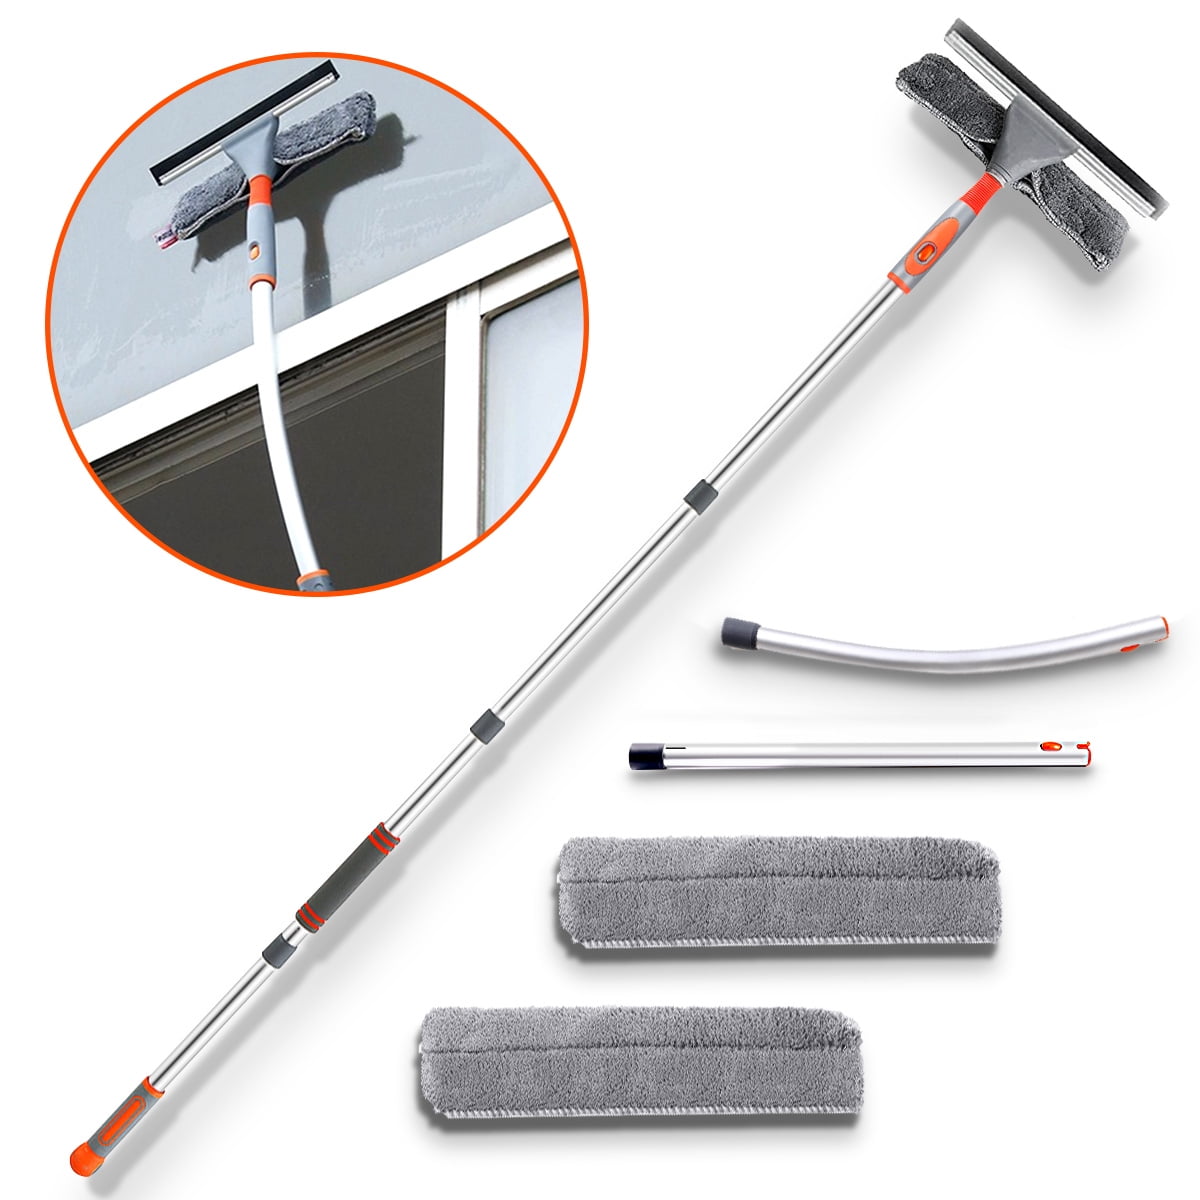 DocaPole 5-12 Foot Extension Pole Squeegee & Window Washer Combo // Telescopic Pole for Window Cleaning // Includes 3 Sizes of Squeegee Blades // Extension Pole for Cleaning Windows